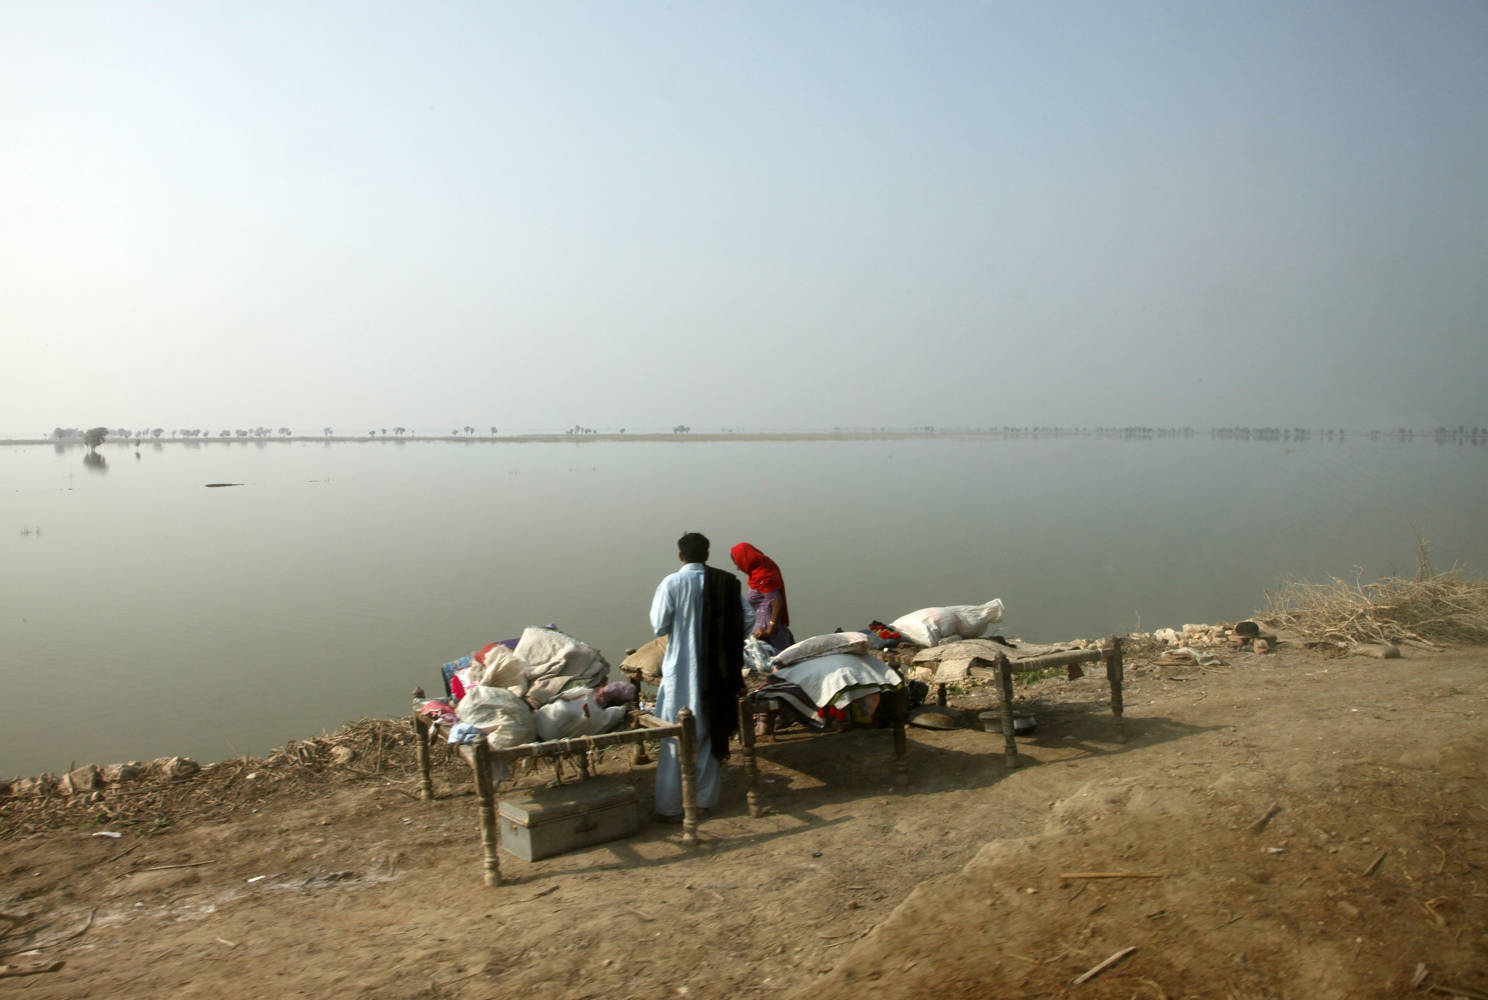 Families returning to their communities following the flooding in Pakistan are often being forced to camp by the roadside, as the flood waters have still not receded sufficiently for them to return to their homes. Photo: DFID / Russell Watkins